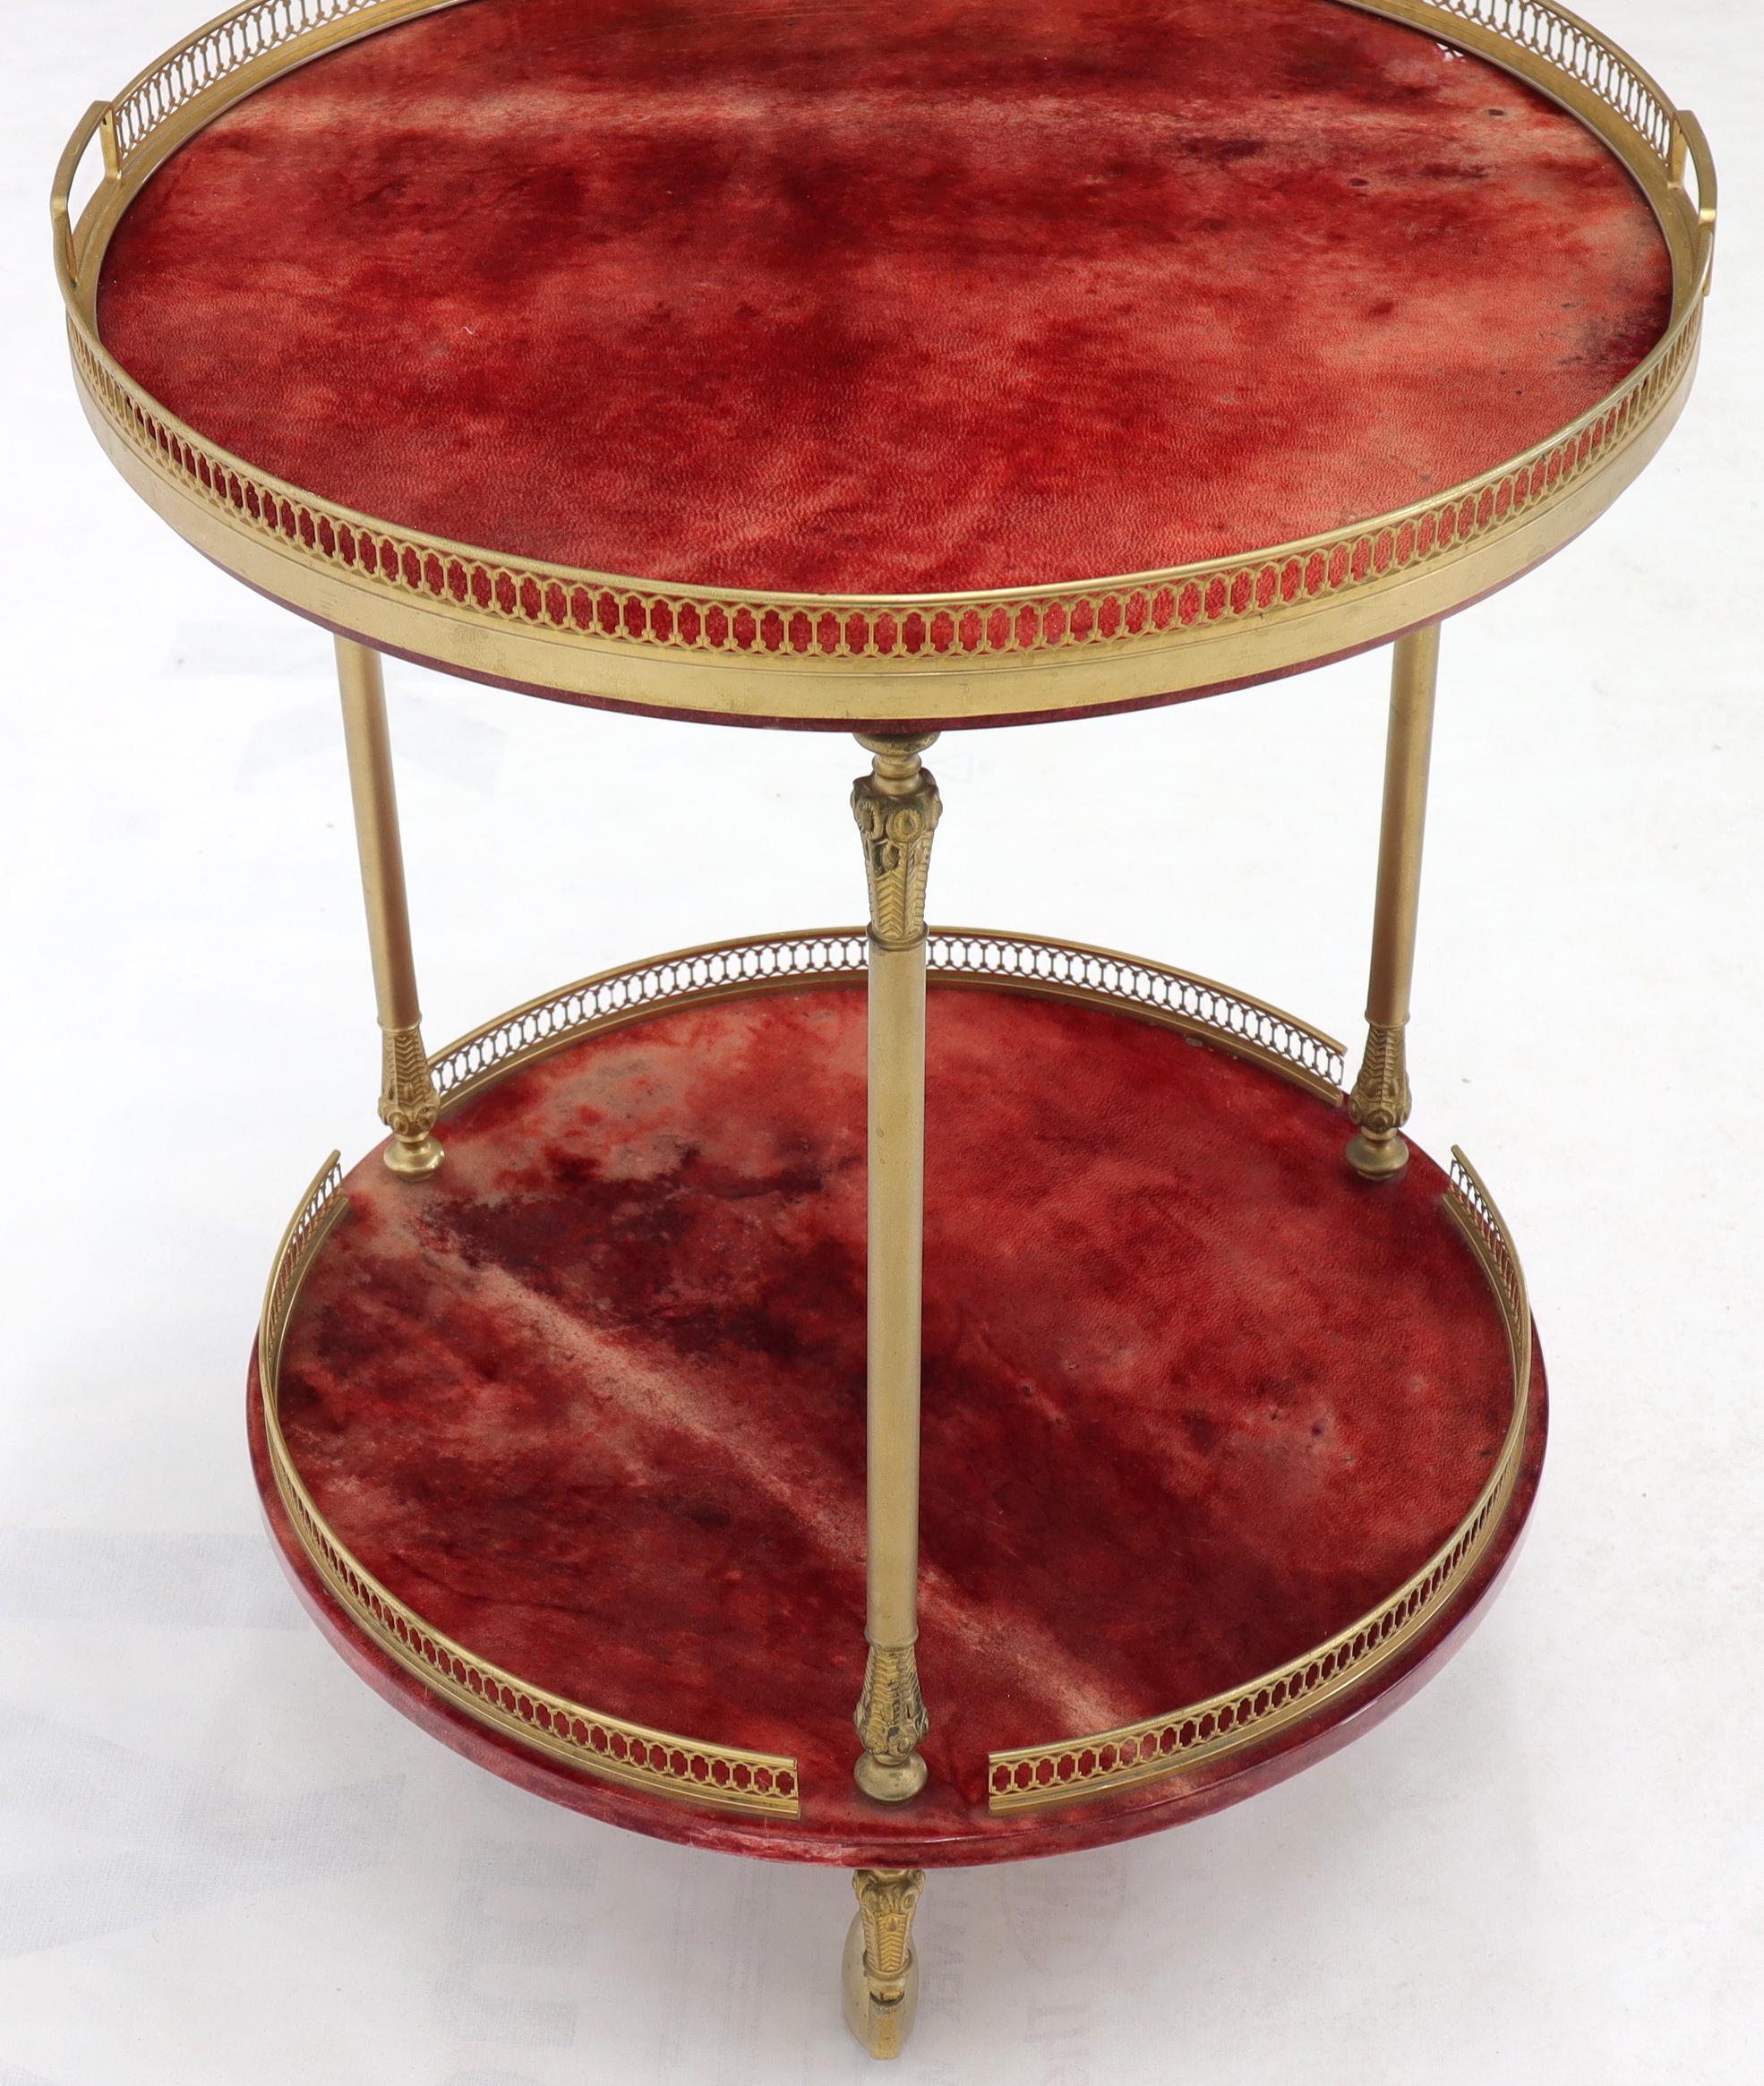 Goatskin Round Aldo Tura Lacquered Parchment Goat Skin Serving Bar Cart For Sale